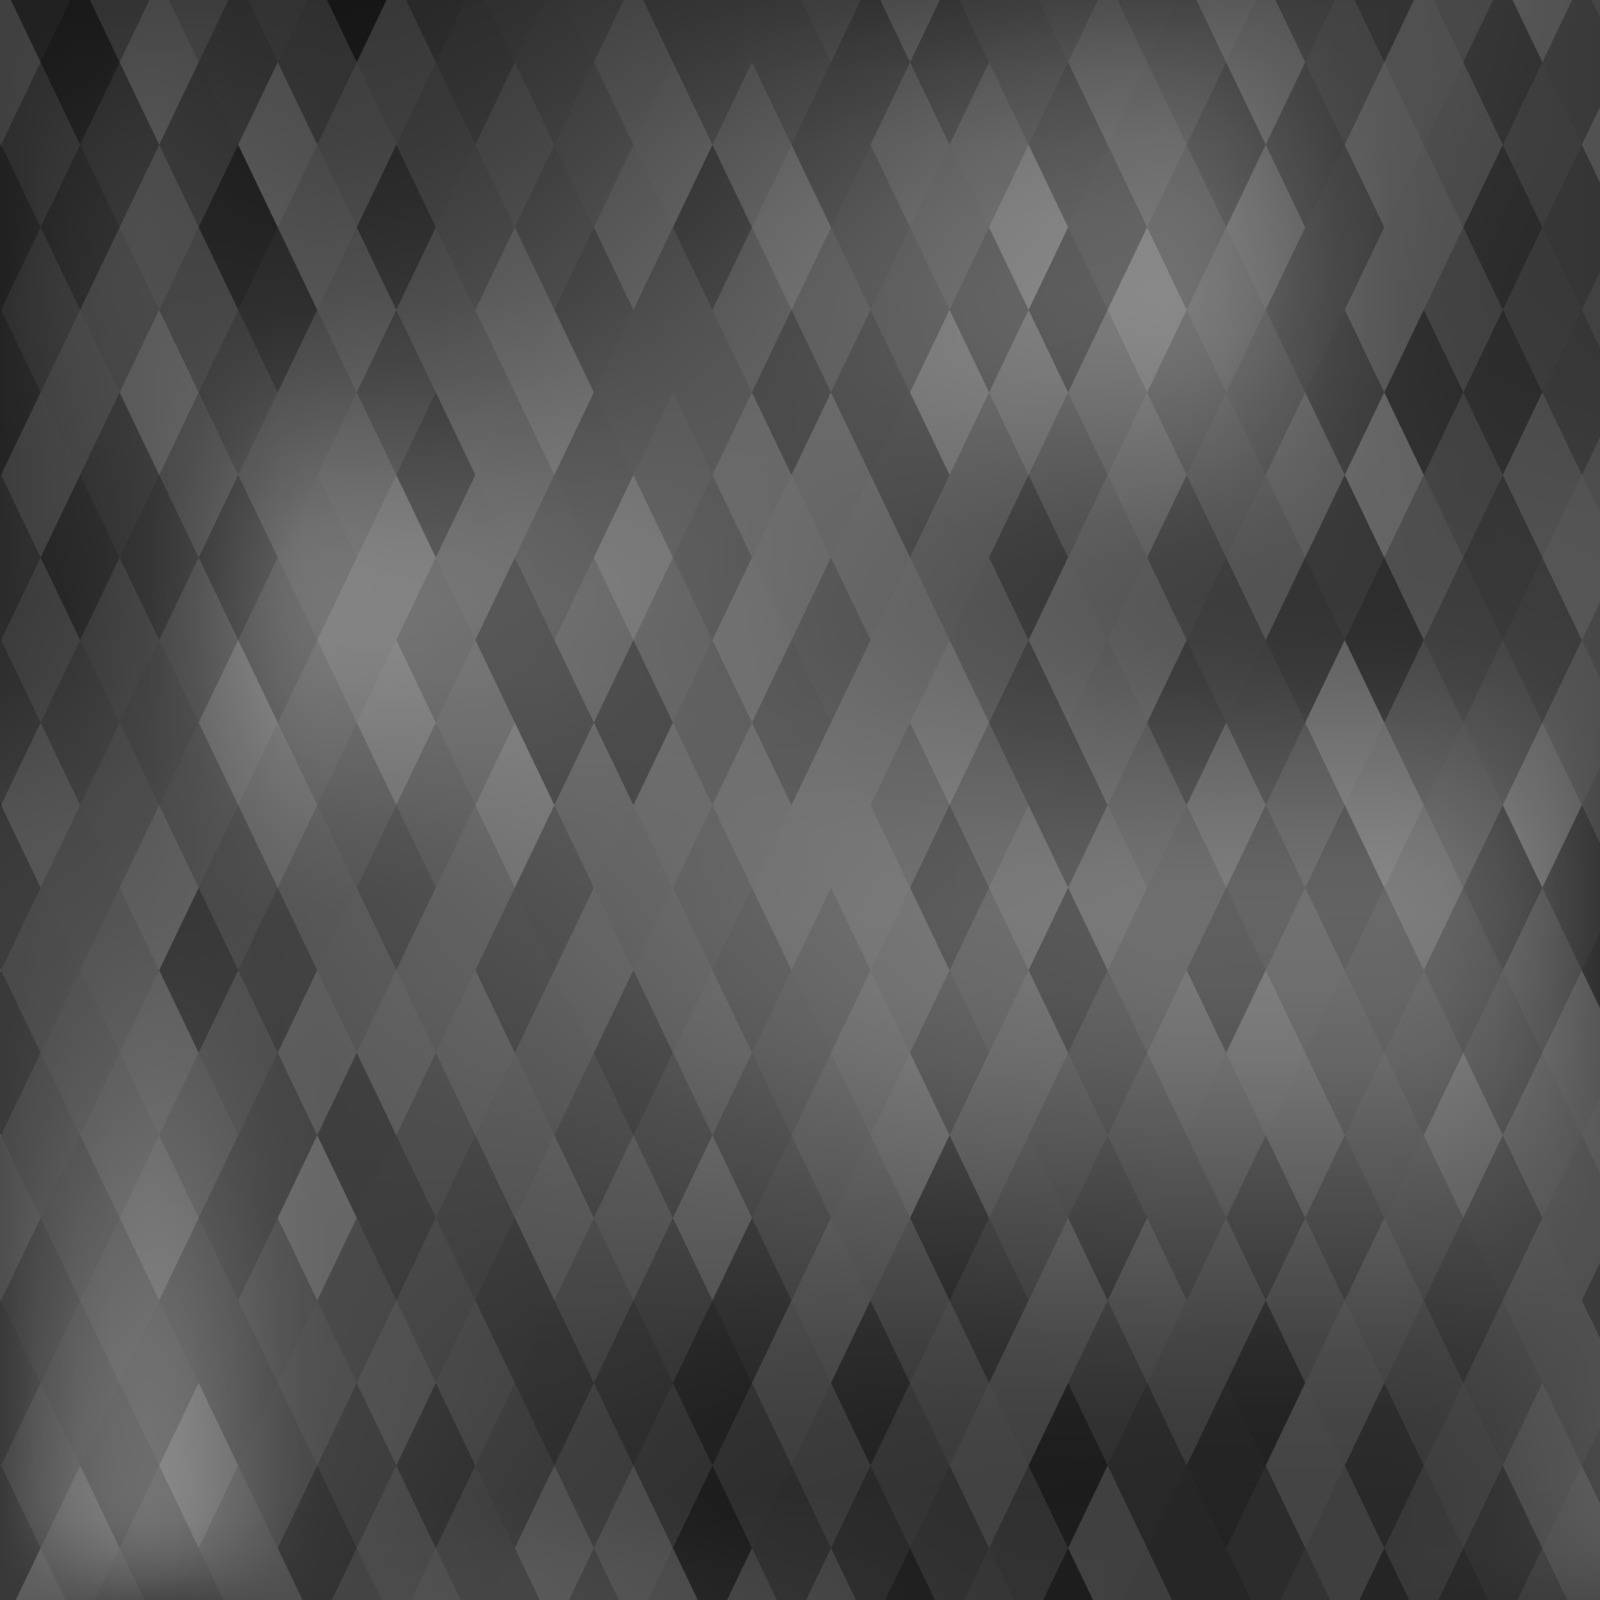 Abstract Mosaic Dark Background. Abstract Grey Polygonal Background.